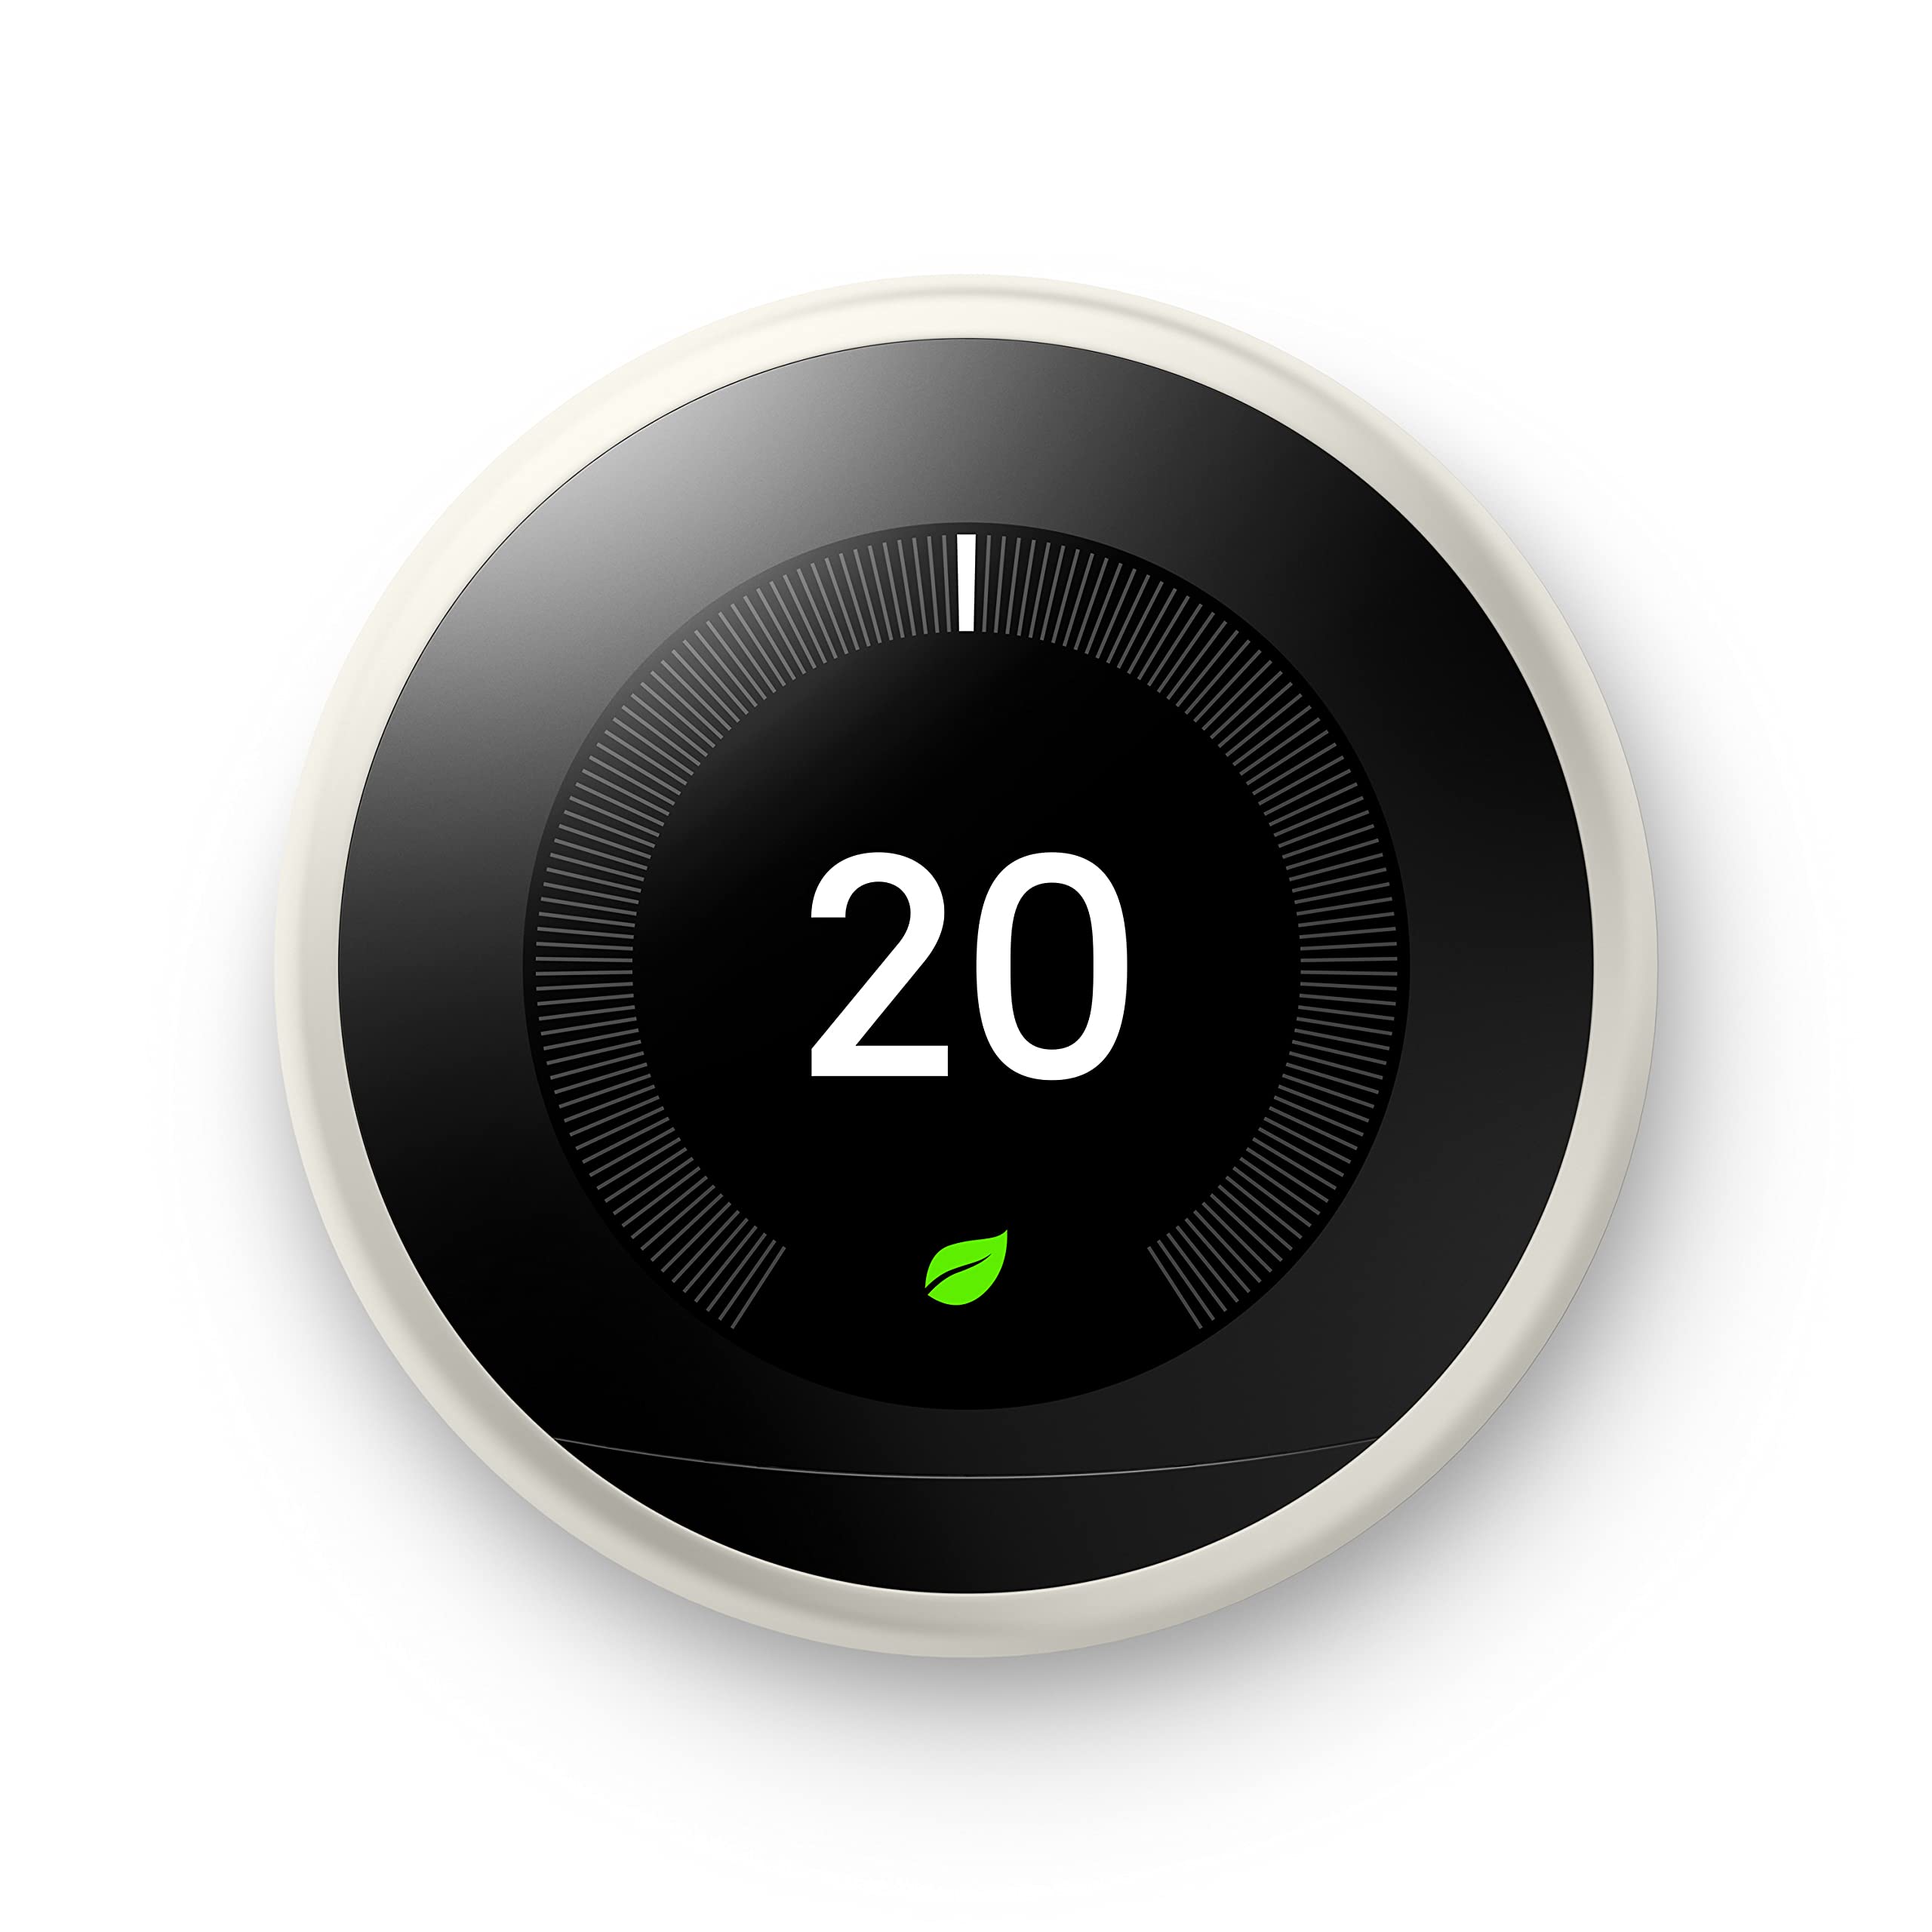 Google Nest Learning Thermostat - the best thermostat for airbnb